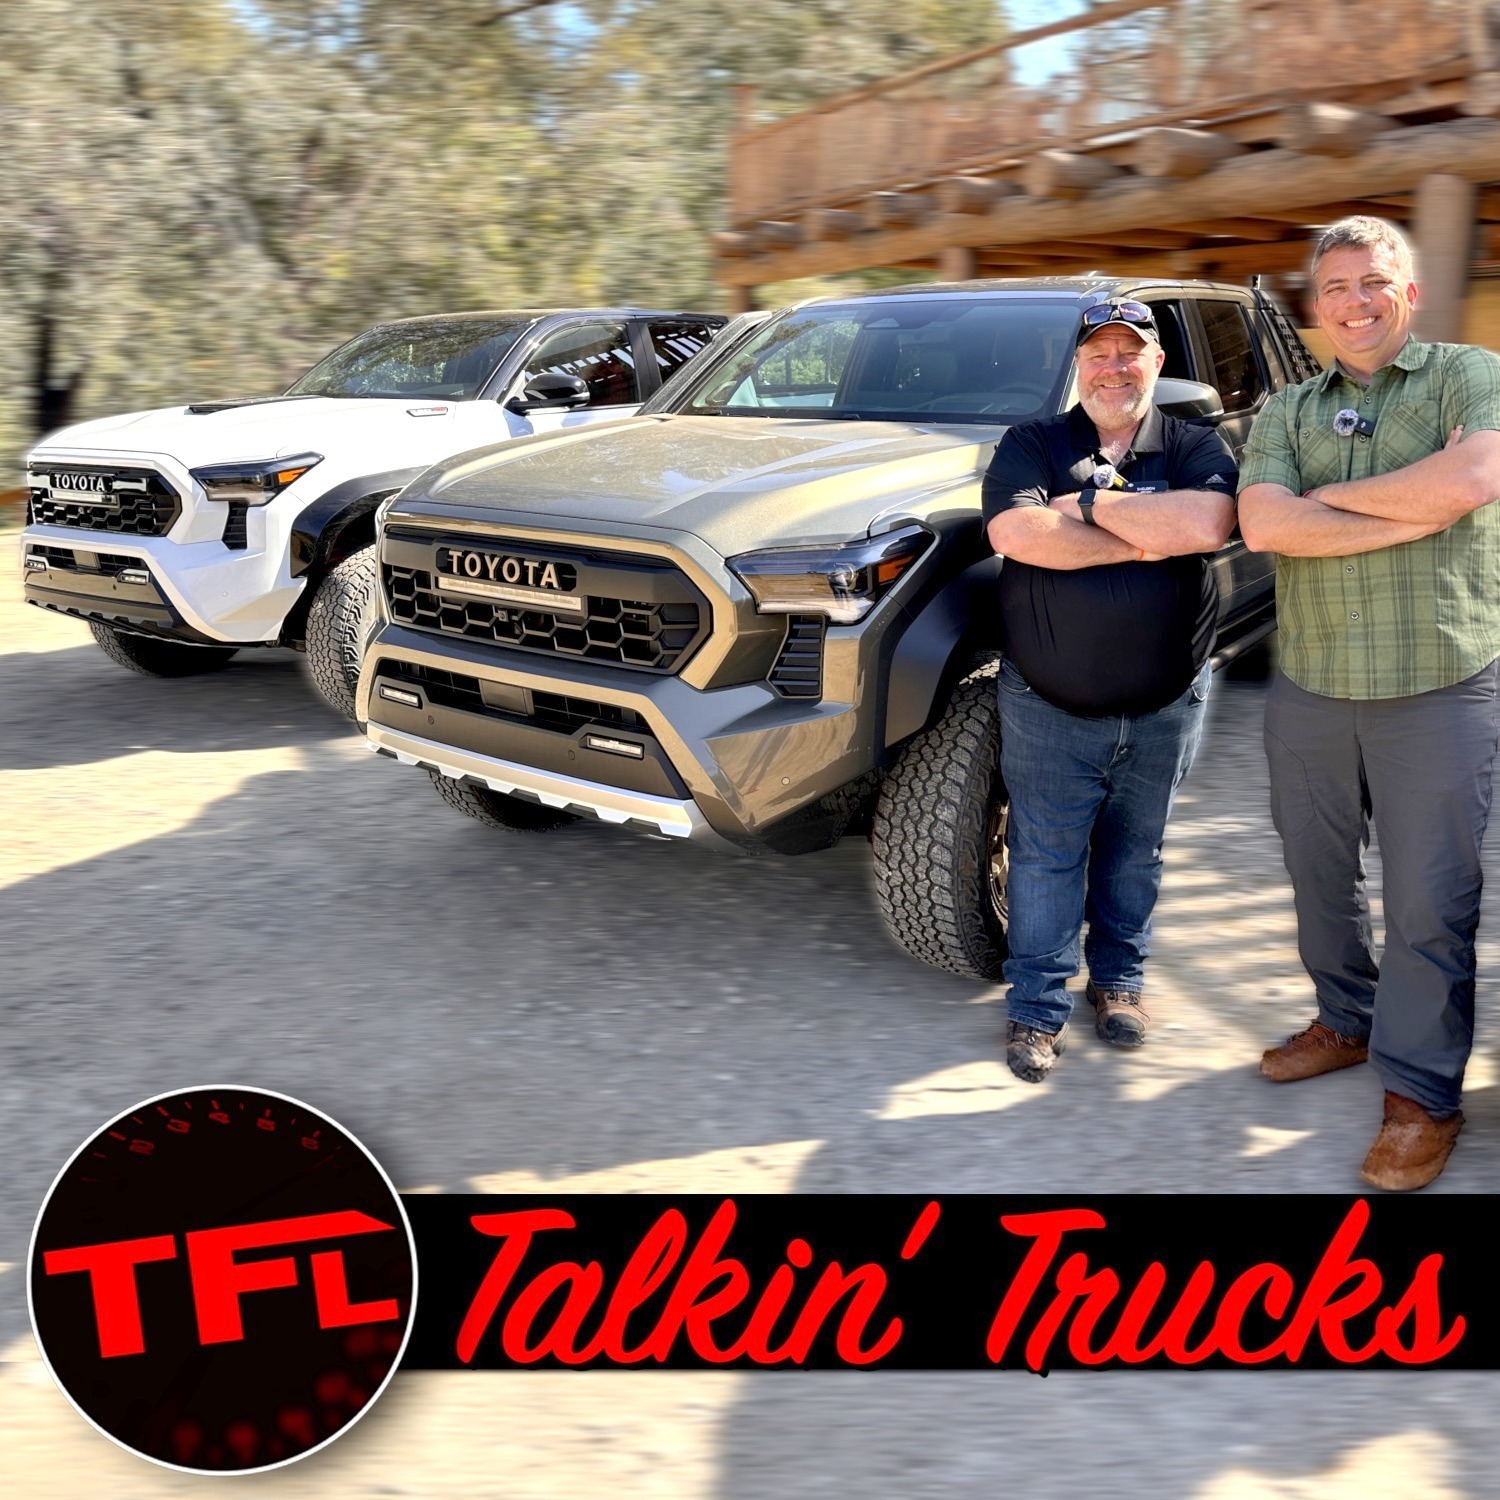 Ep. 225: Toyota Tacoma TRD Pro vs Trailhunter - The Chief Engineer Explains The Differences!